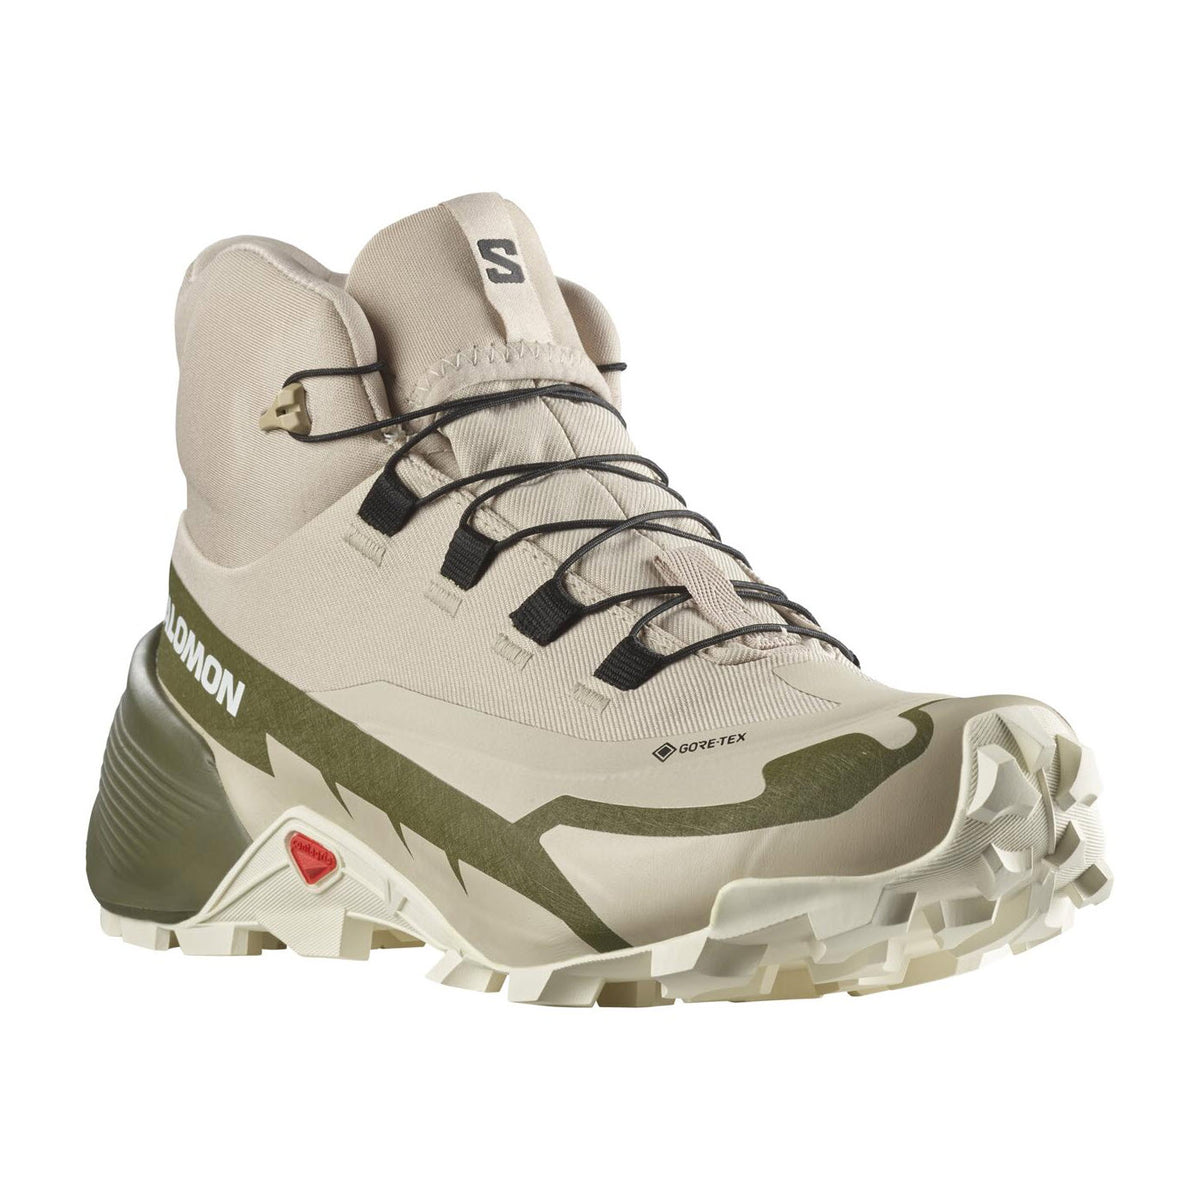 A single Salomon CROSS HIKE 2 MID GTX SHALE/WILD - WOMENS hiking shoe, featuring a beige and green color scheme with CLIMASALOMON WATERPROOF technology and a rugged sole.